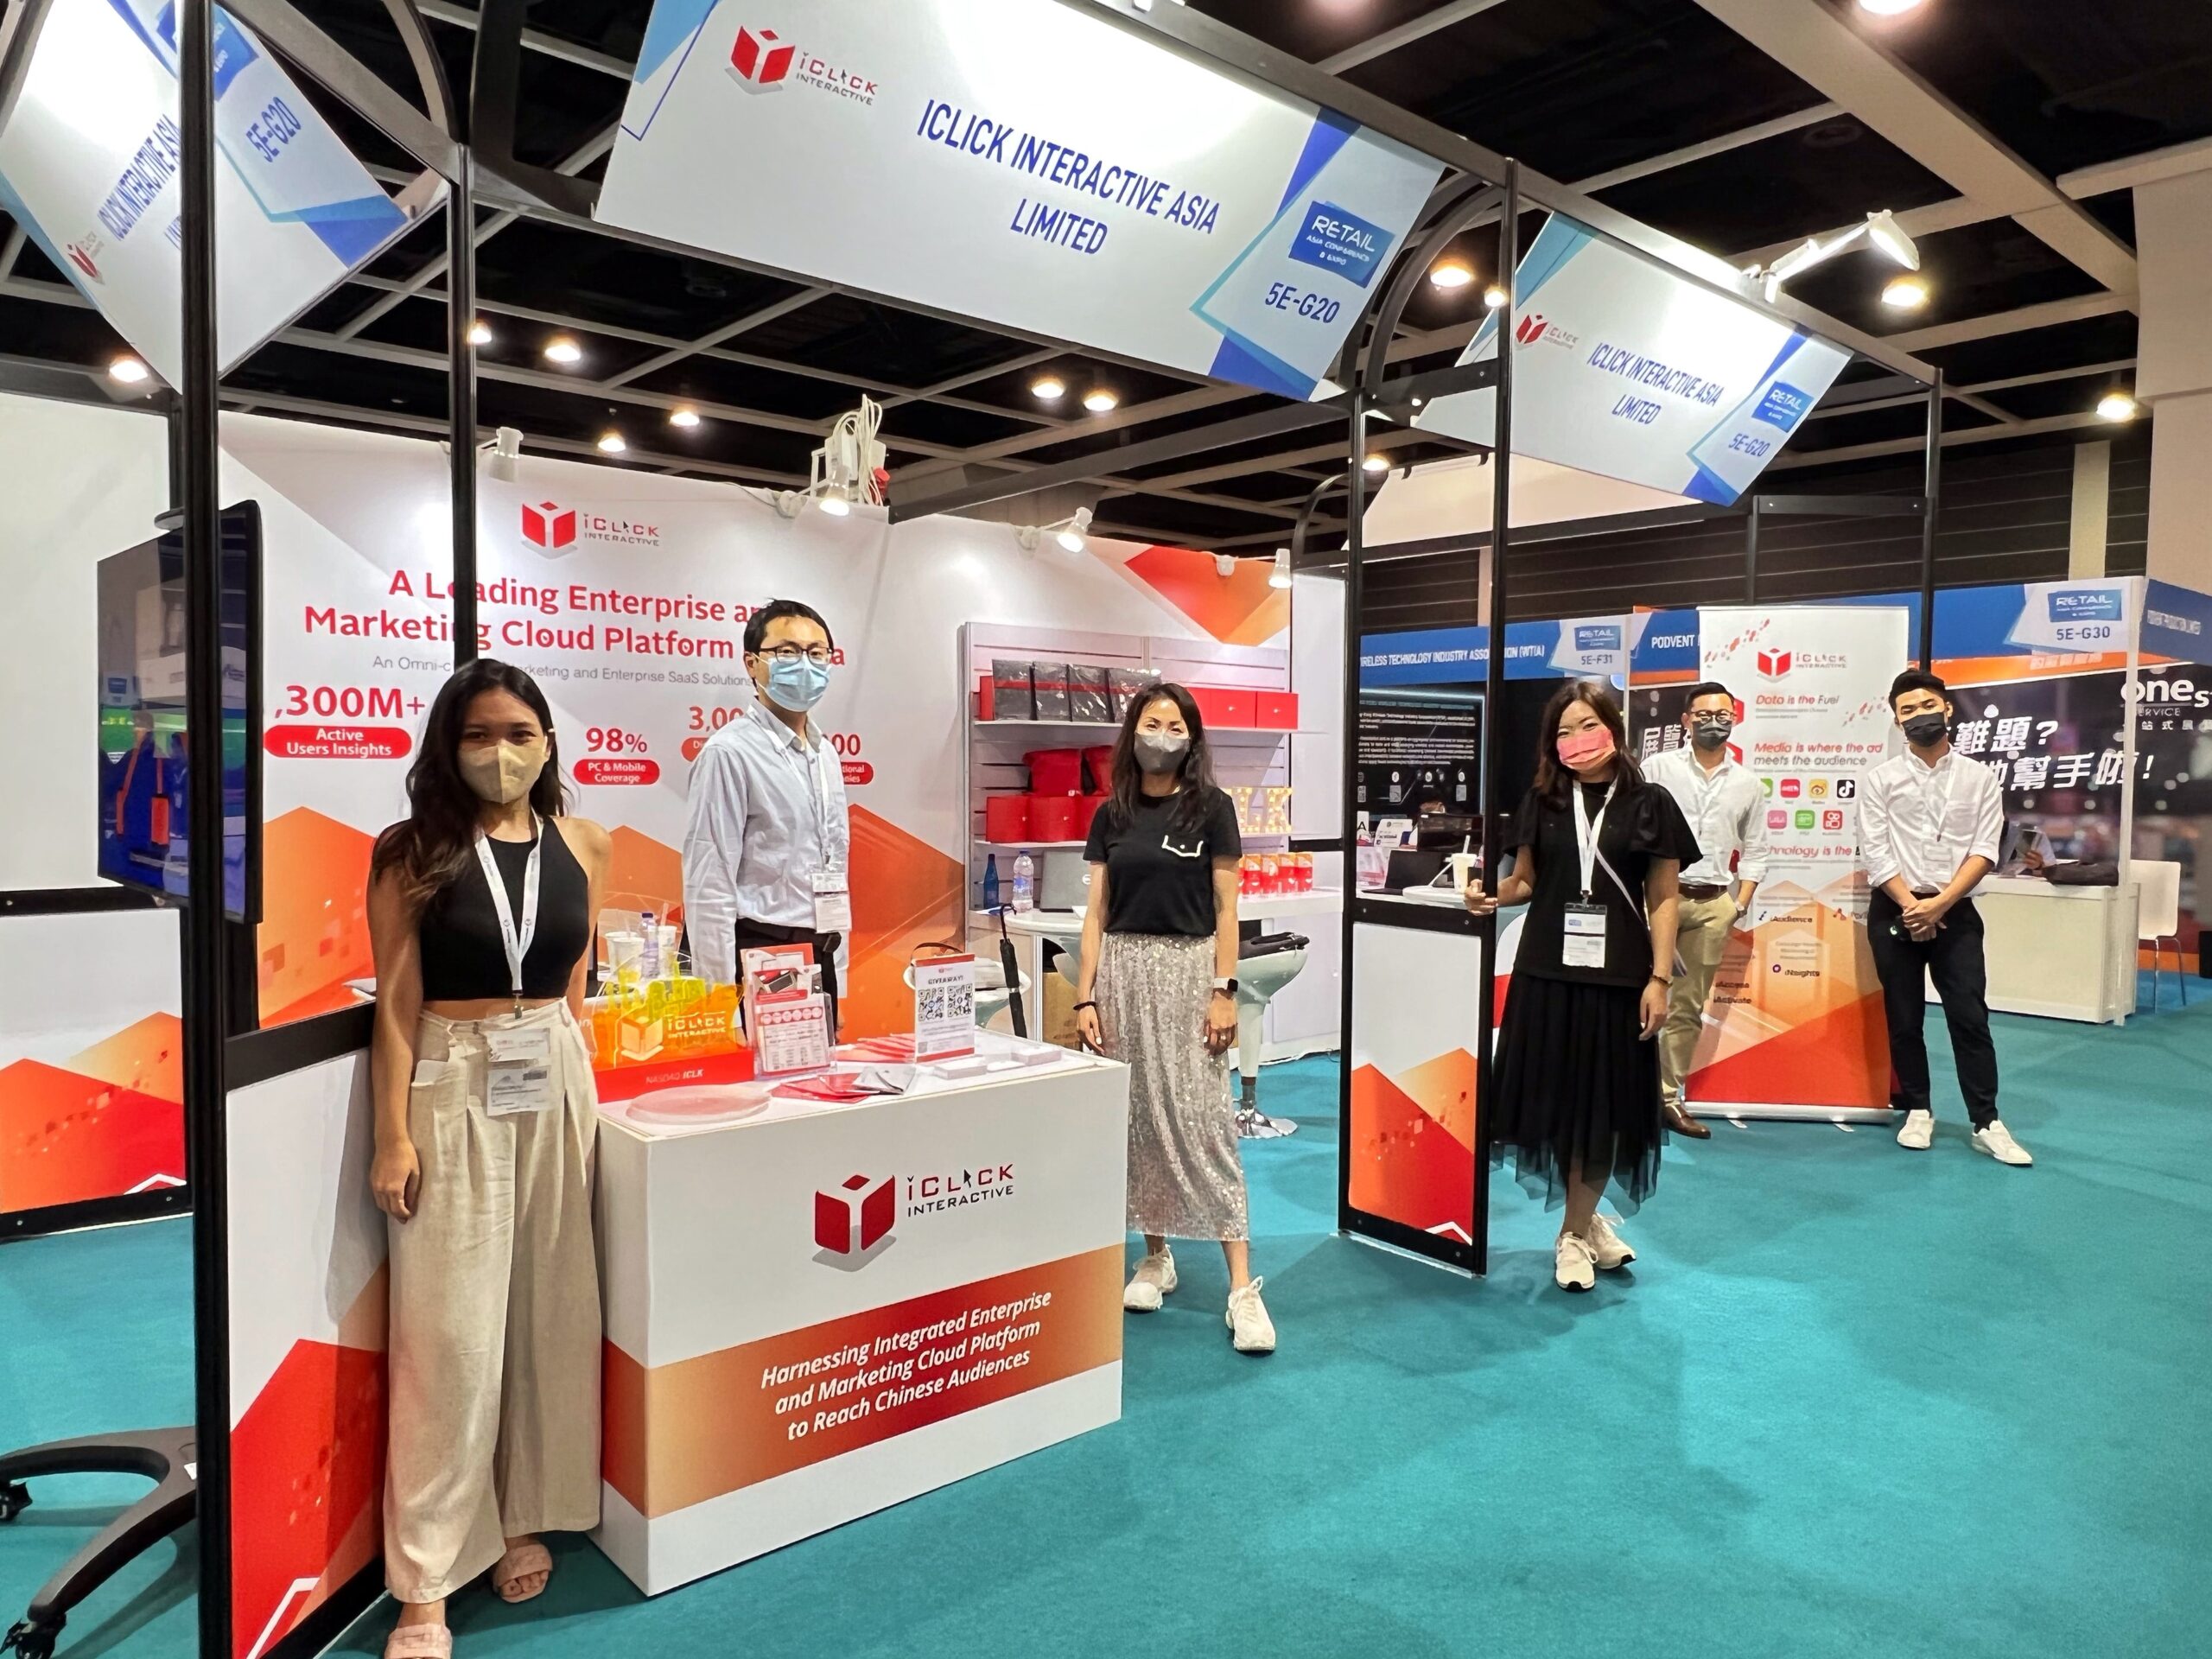 iClick Concluded a Tremendous Success at the Retail Asia Conference & Expo!